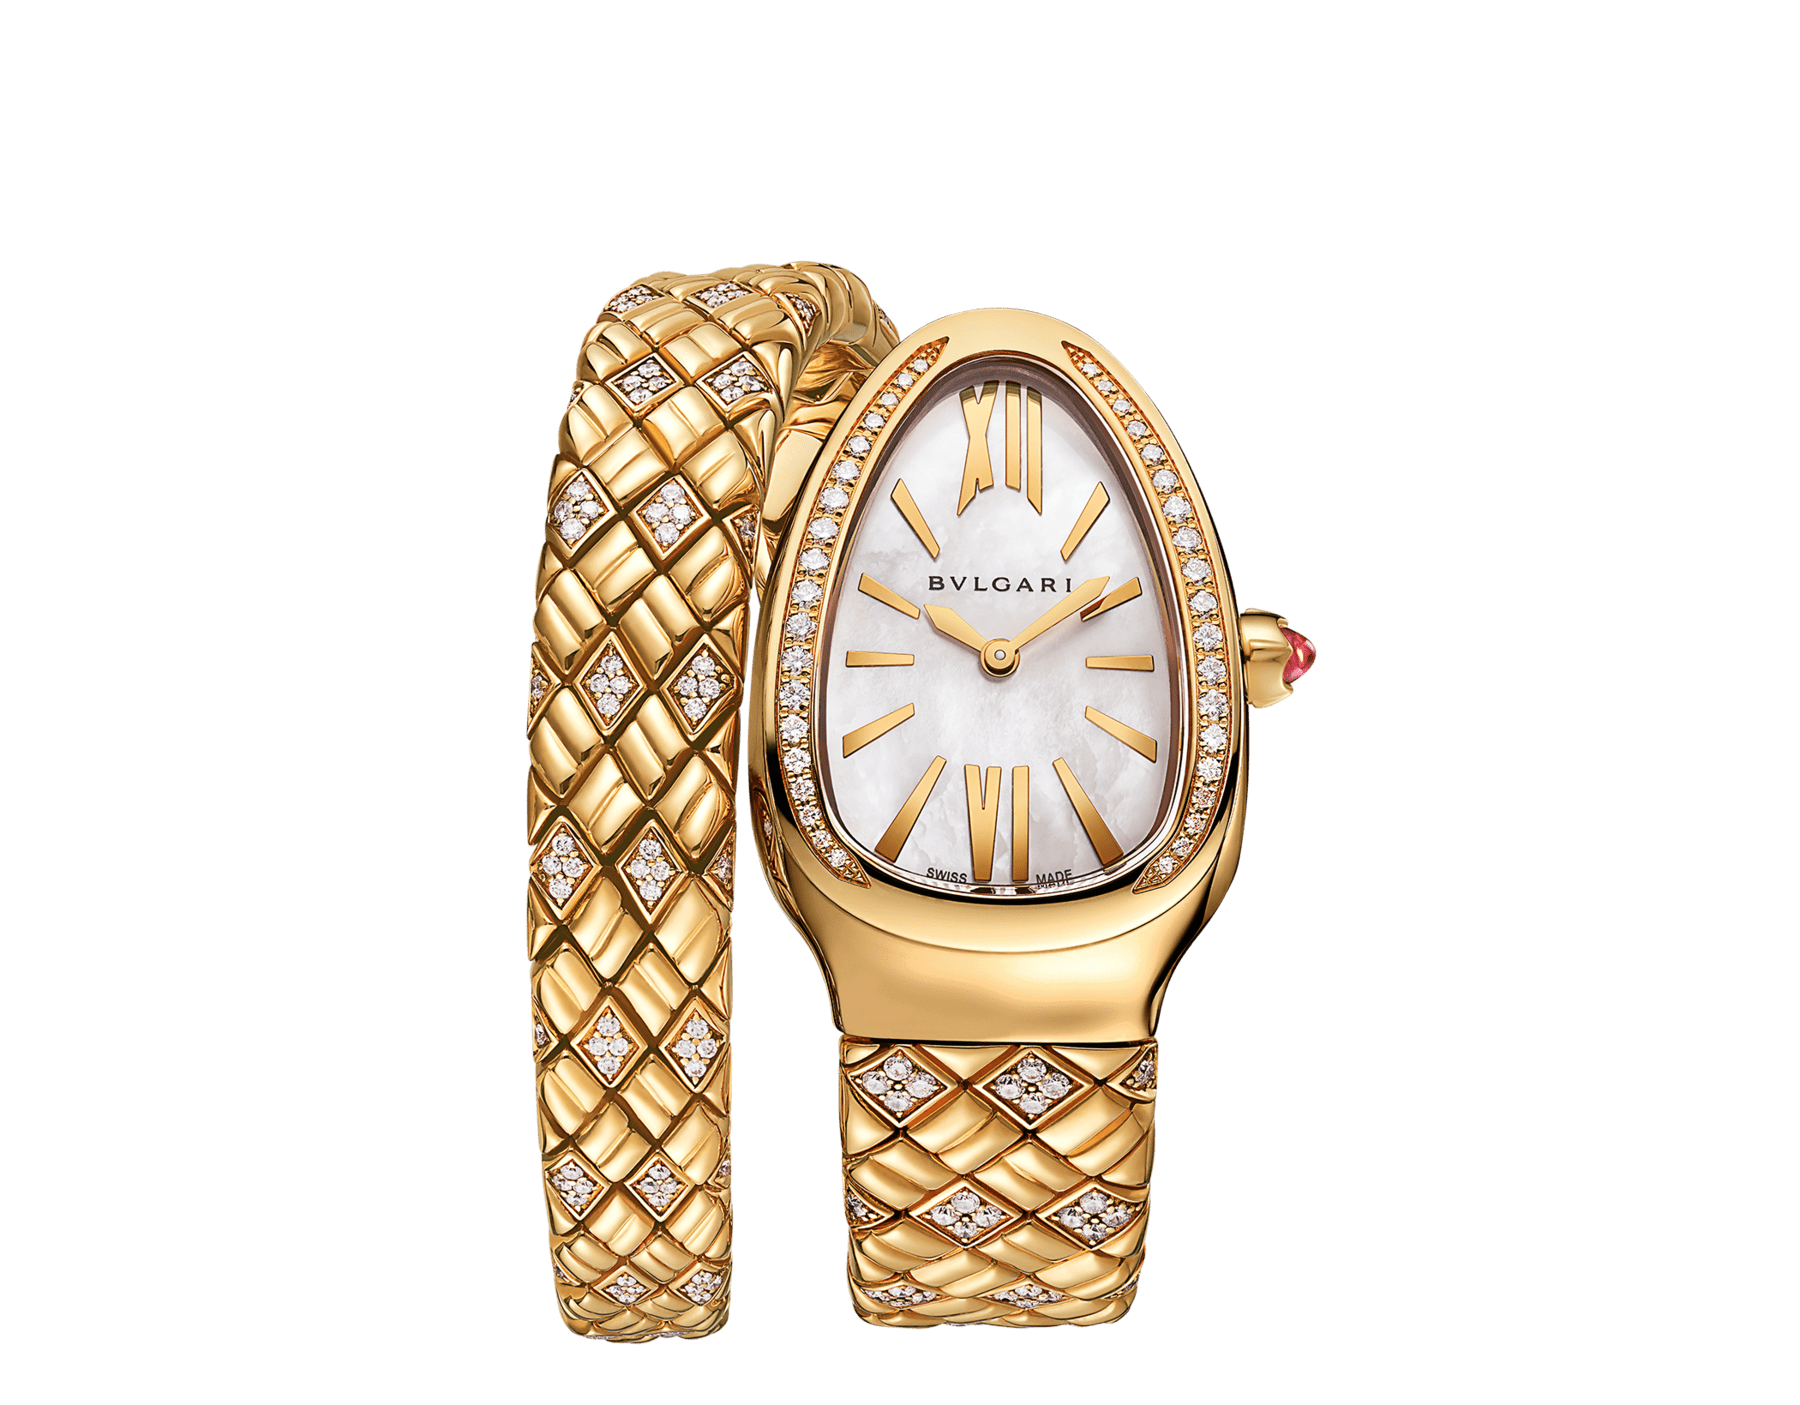 Serpenti Spiga single-spiral watch in 18 kt yellow gold with diamond-set bezel and bracelet, and white mother-of-pearl dial. Water resistant up to 30 meters SERPENTI-SPIGA-SPP35LAPPGD1-1TT image 1